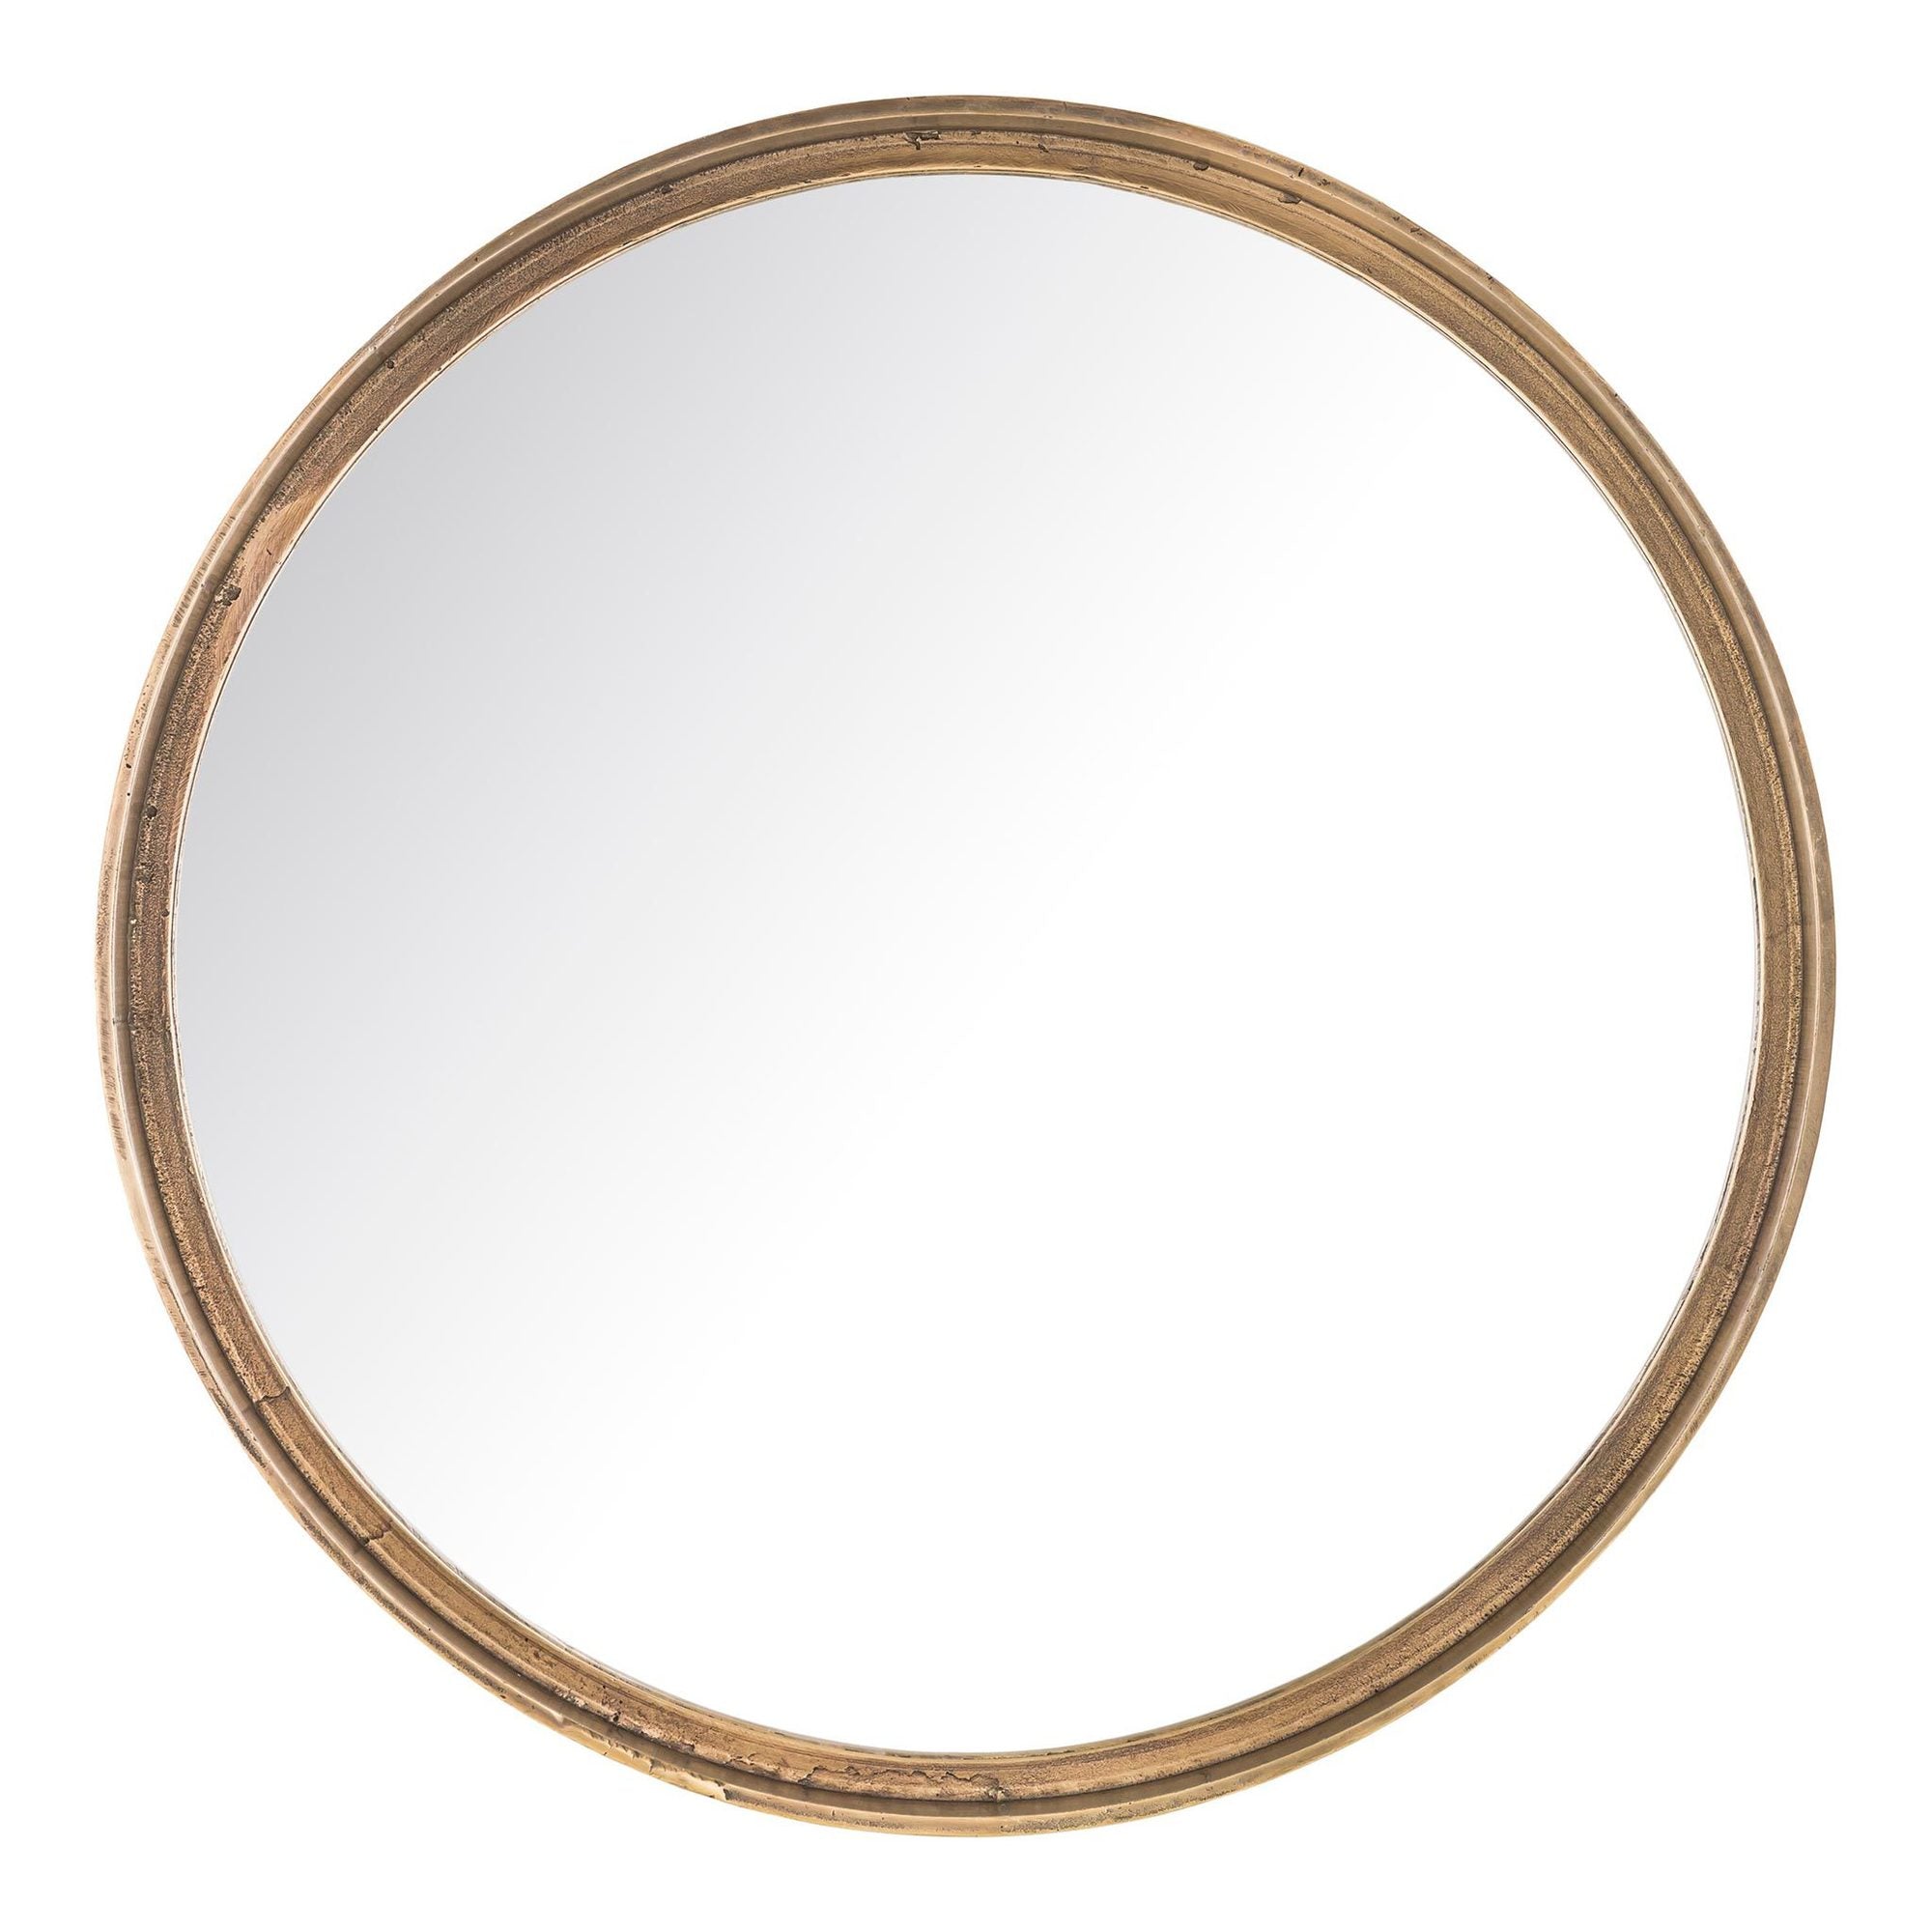 MOES-WINCHESTER MIRROR SMALL-Wall Mirrors-MODTEMPO